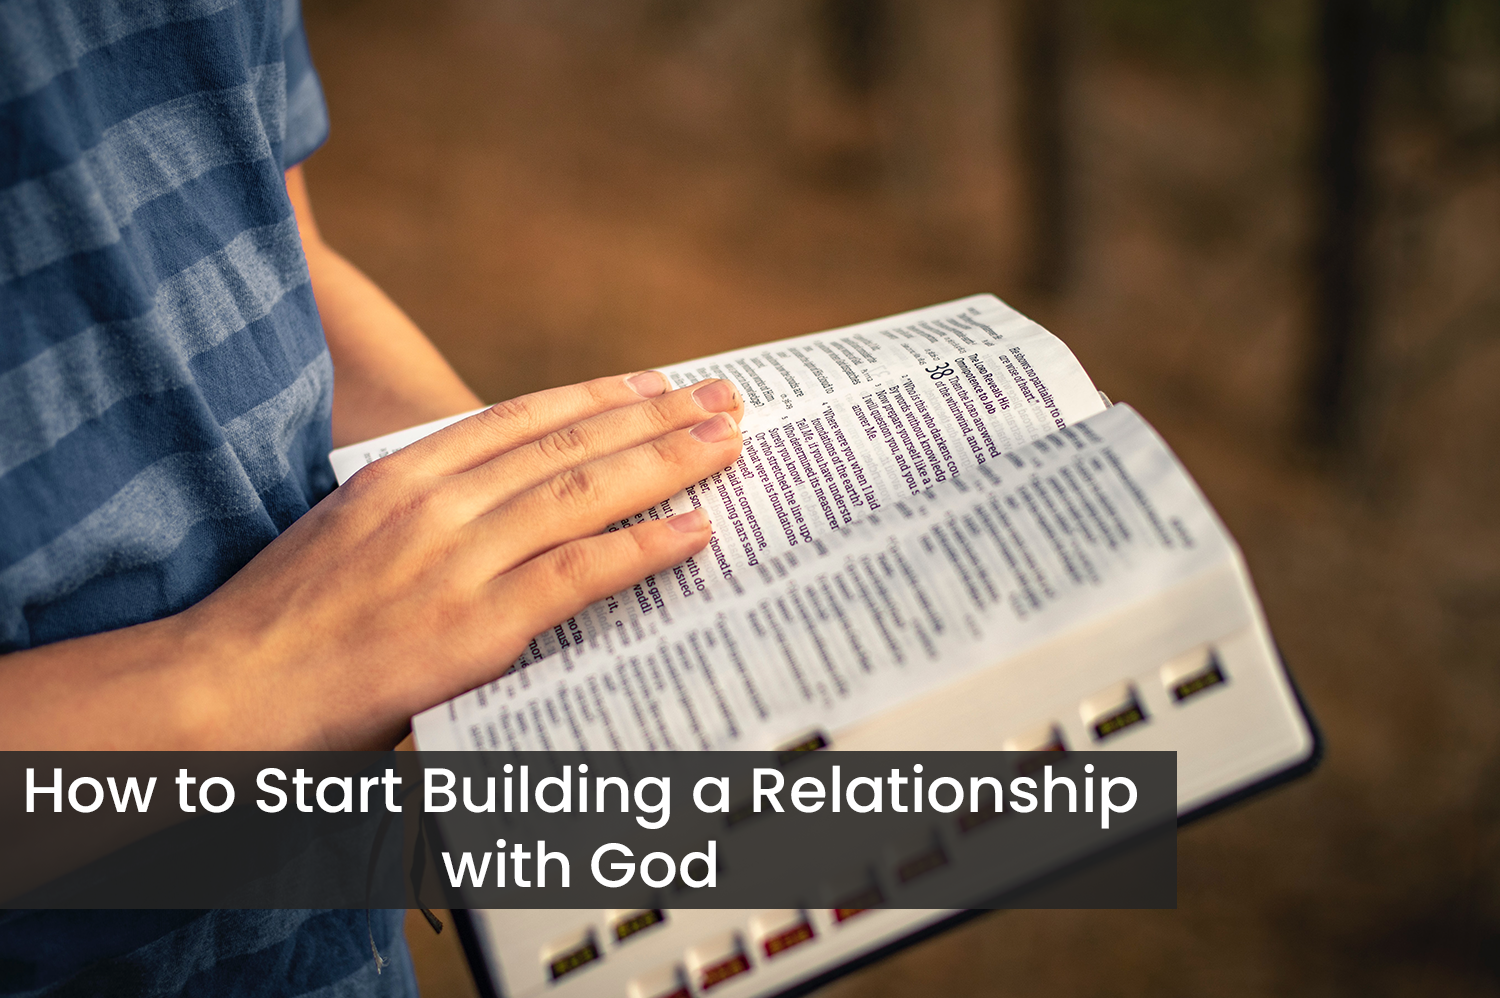 An anonymous person reading the Bible, starting to build a relationship with God.